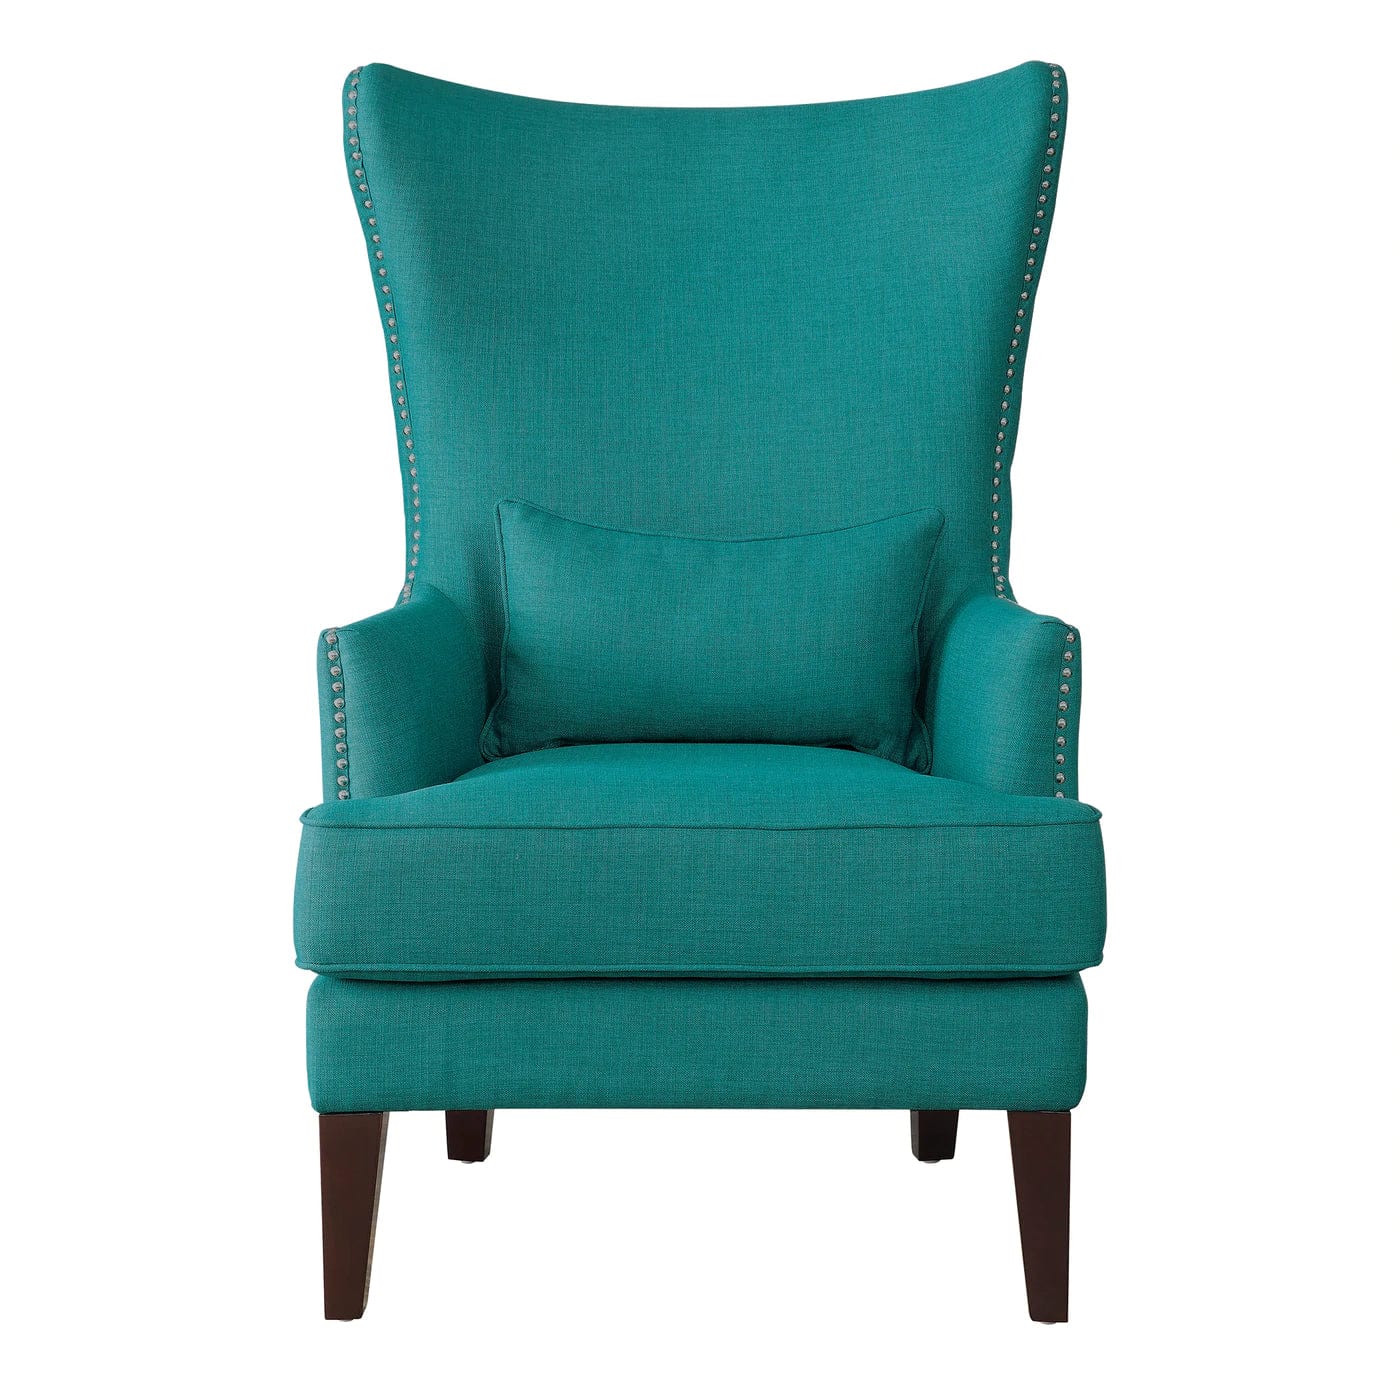 Accent Chair for Living Room, Bedroom